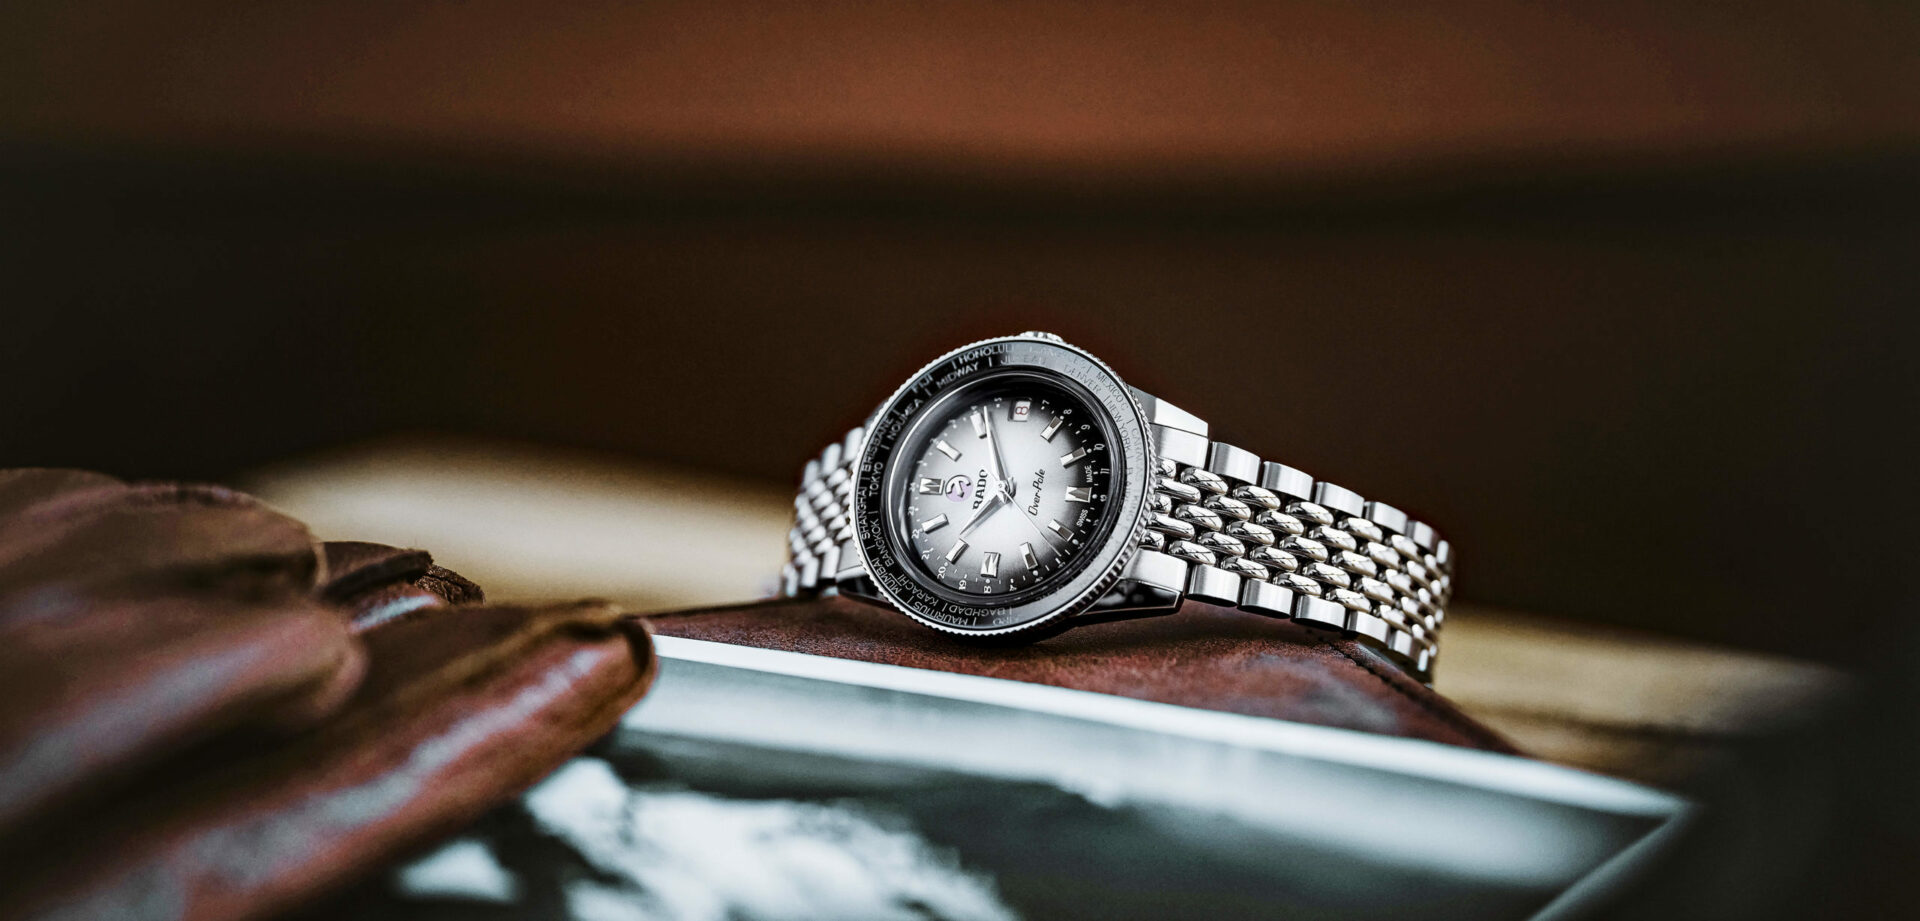 The Rado Captain Cook Over-Pole is the way to do a vintage reissue